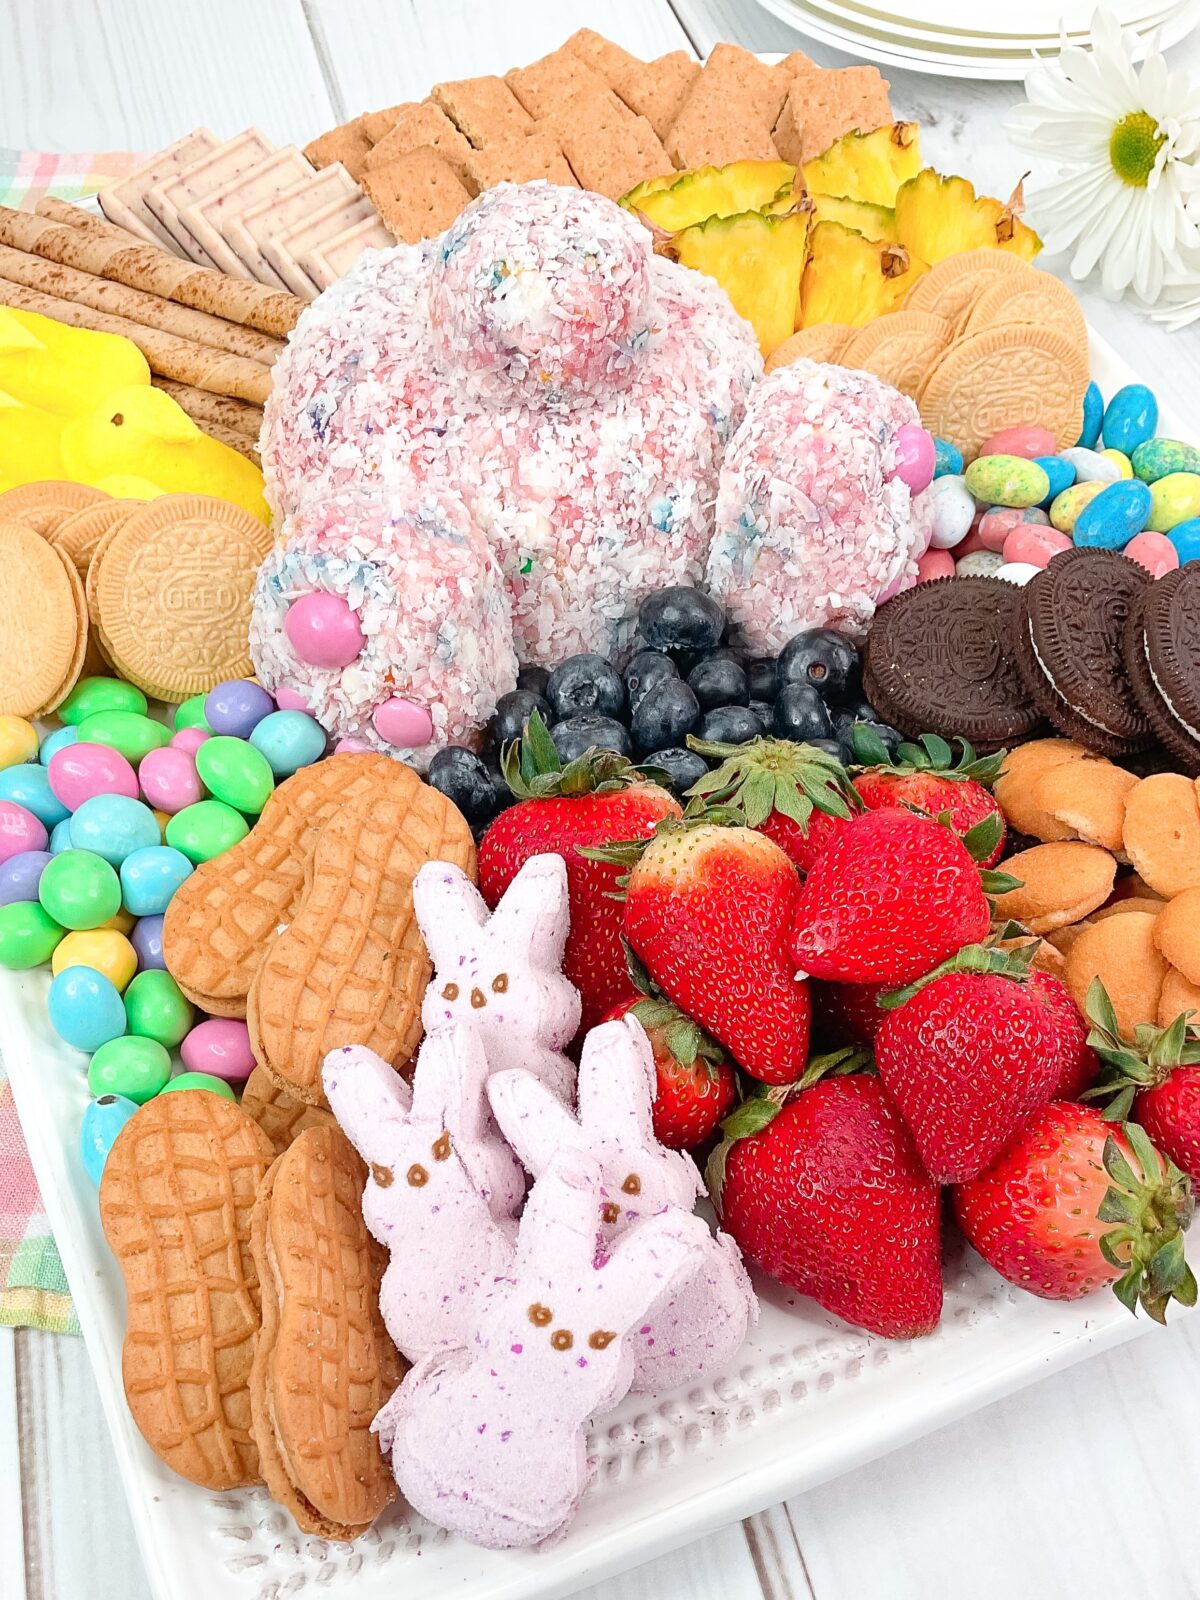 A delicious Bunny Butt Cheese Ball made with strawberry cake mix, cream cheese, sprinkles, and white chocolate – a hit at any Easter party!